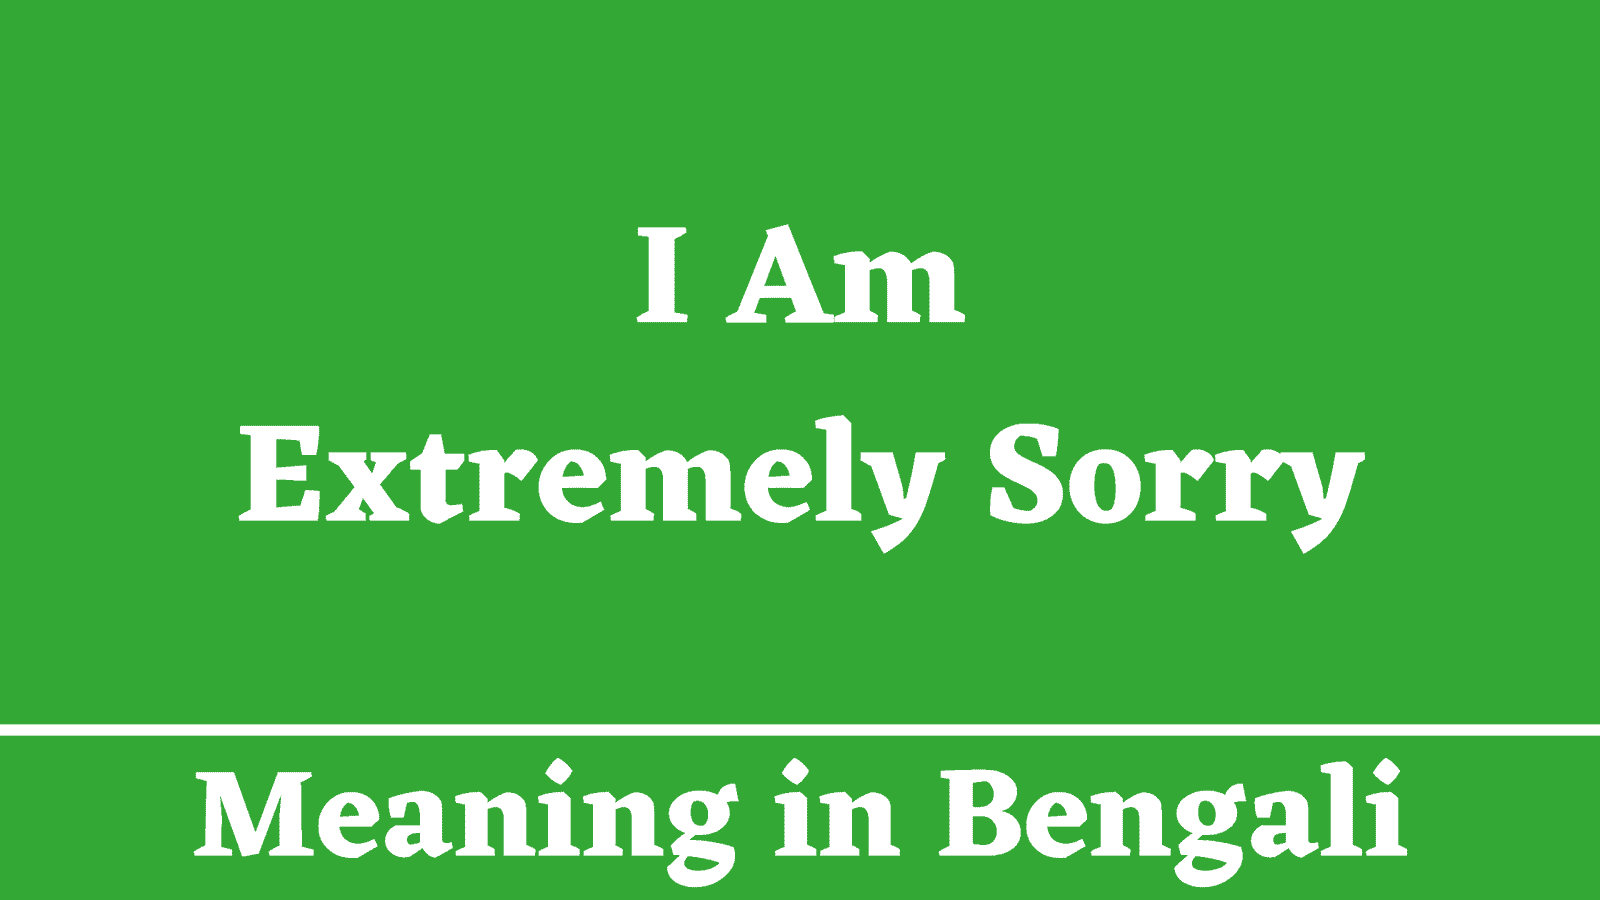 I Am Extremely Sorry Meaning in Bengali